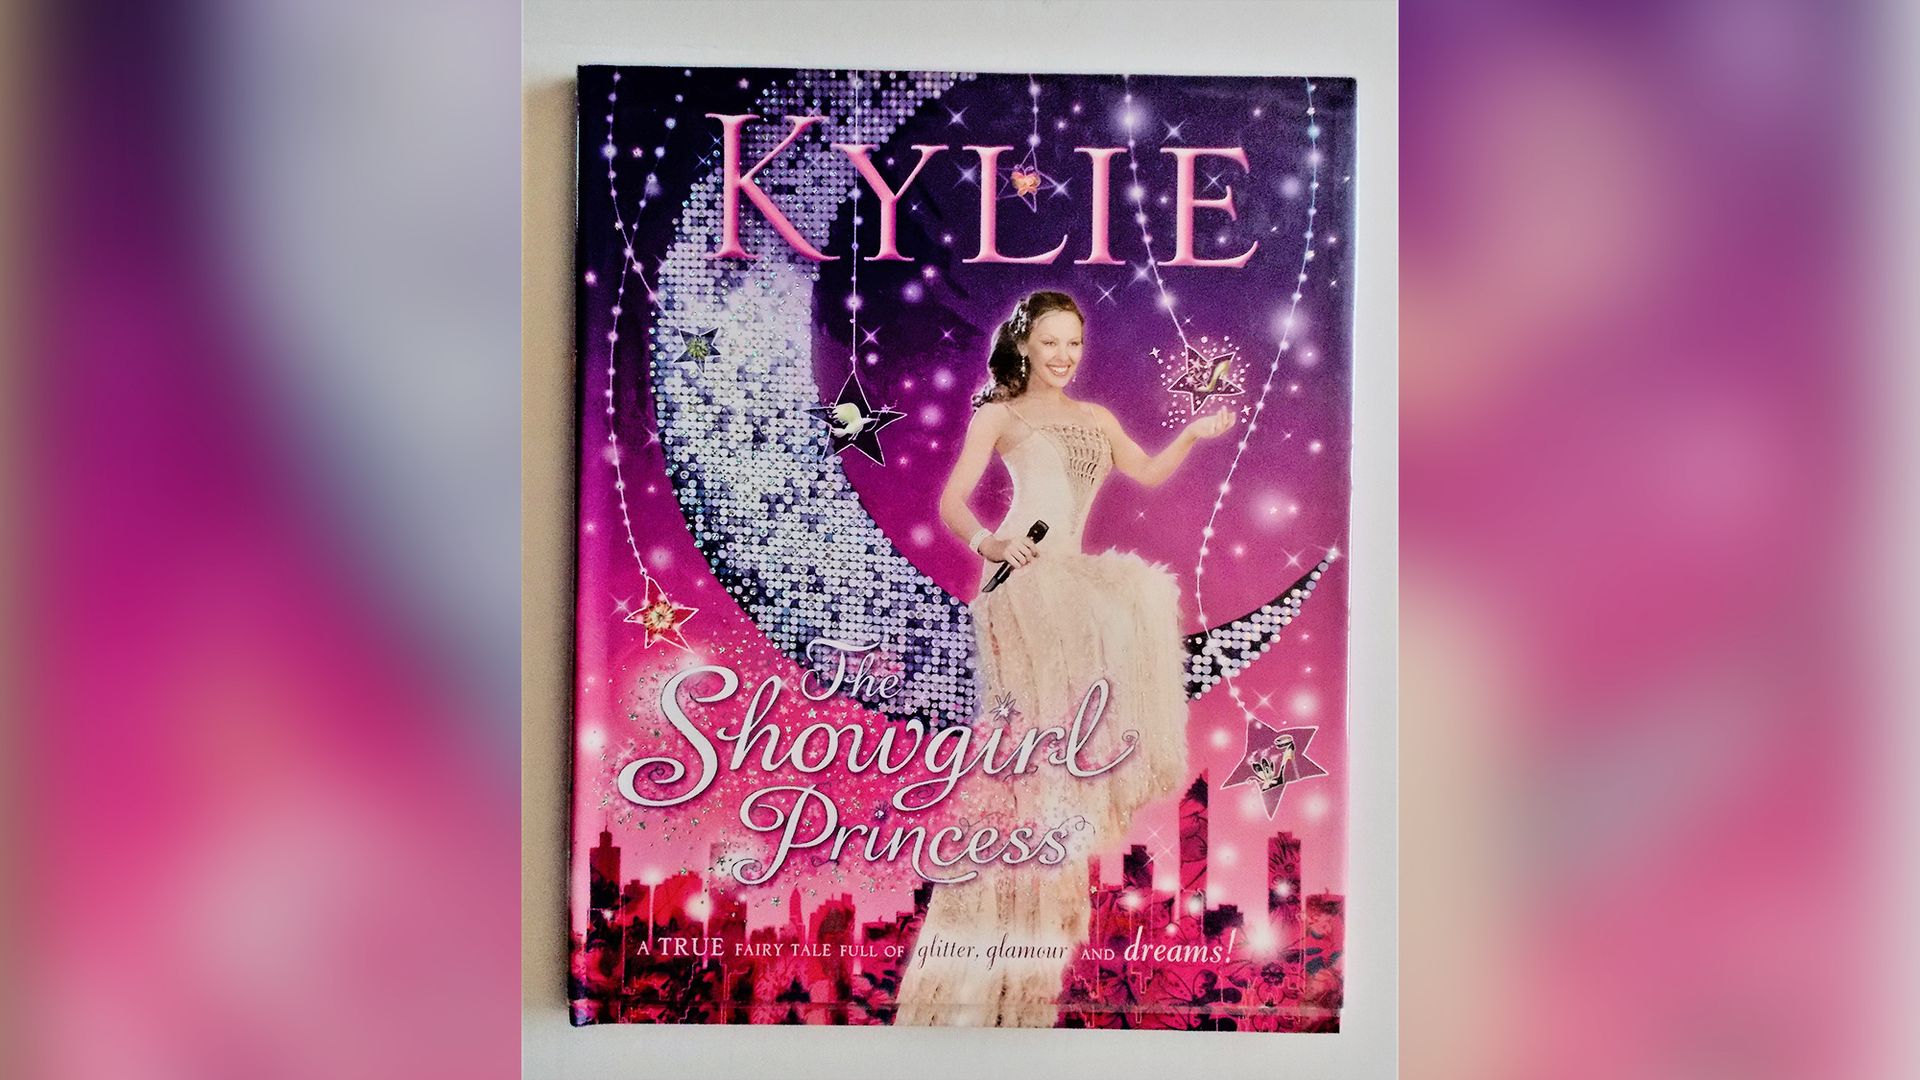 The Showgirl Princess – the children book by Kylie Minogue